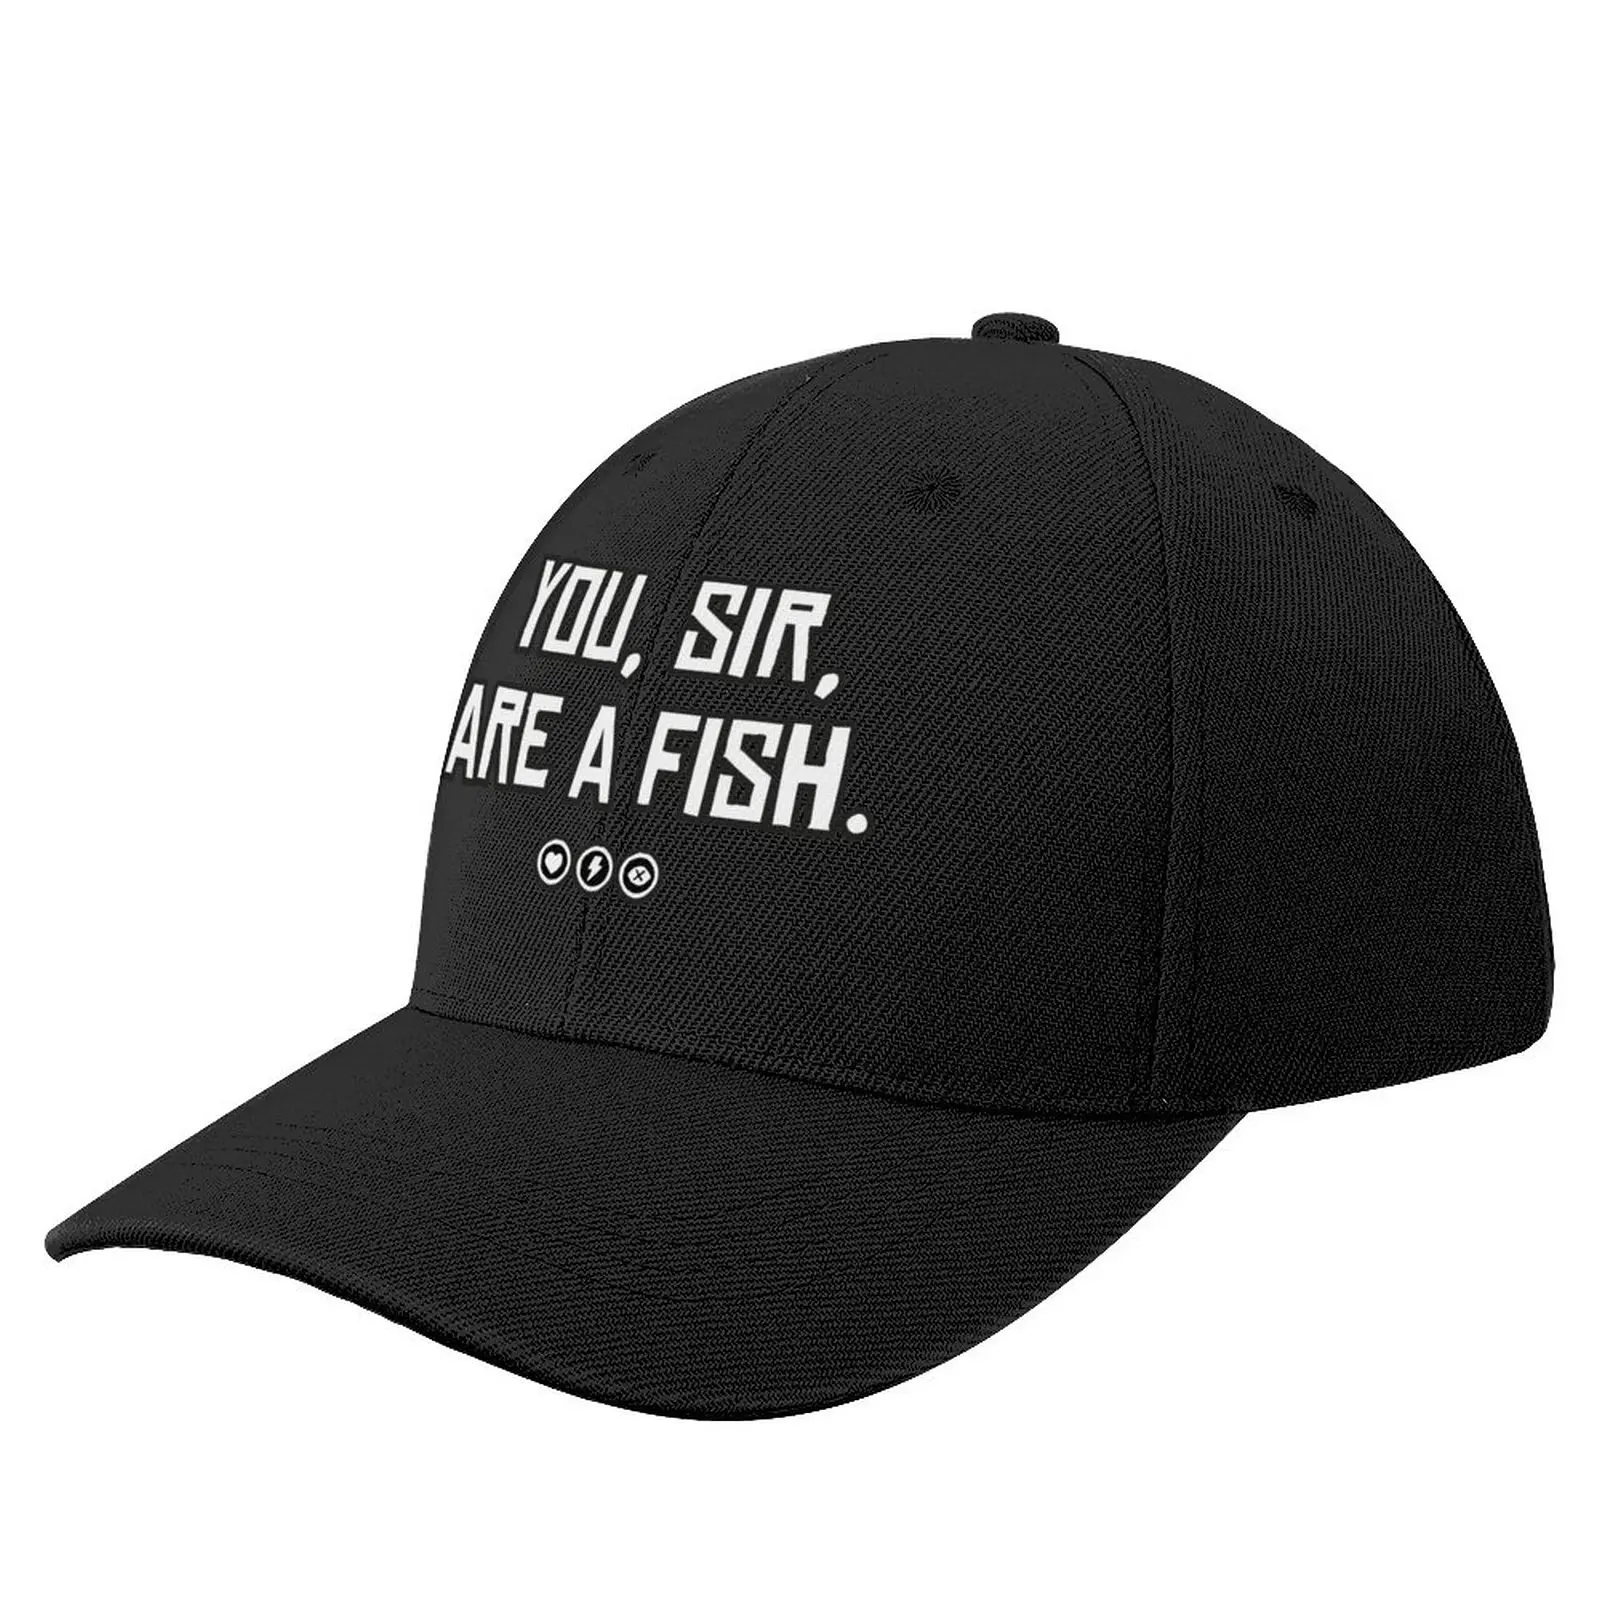 

You, sir, are a fish | Red Dead Redemption 2 Inspired Design Baseball Cap Streetwear Kids Hat boonie hats Man Cap Women's